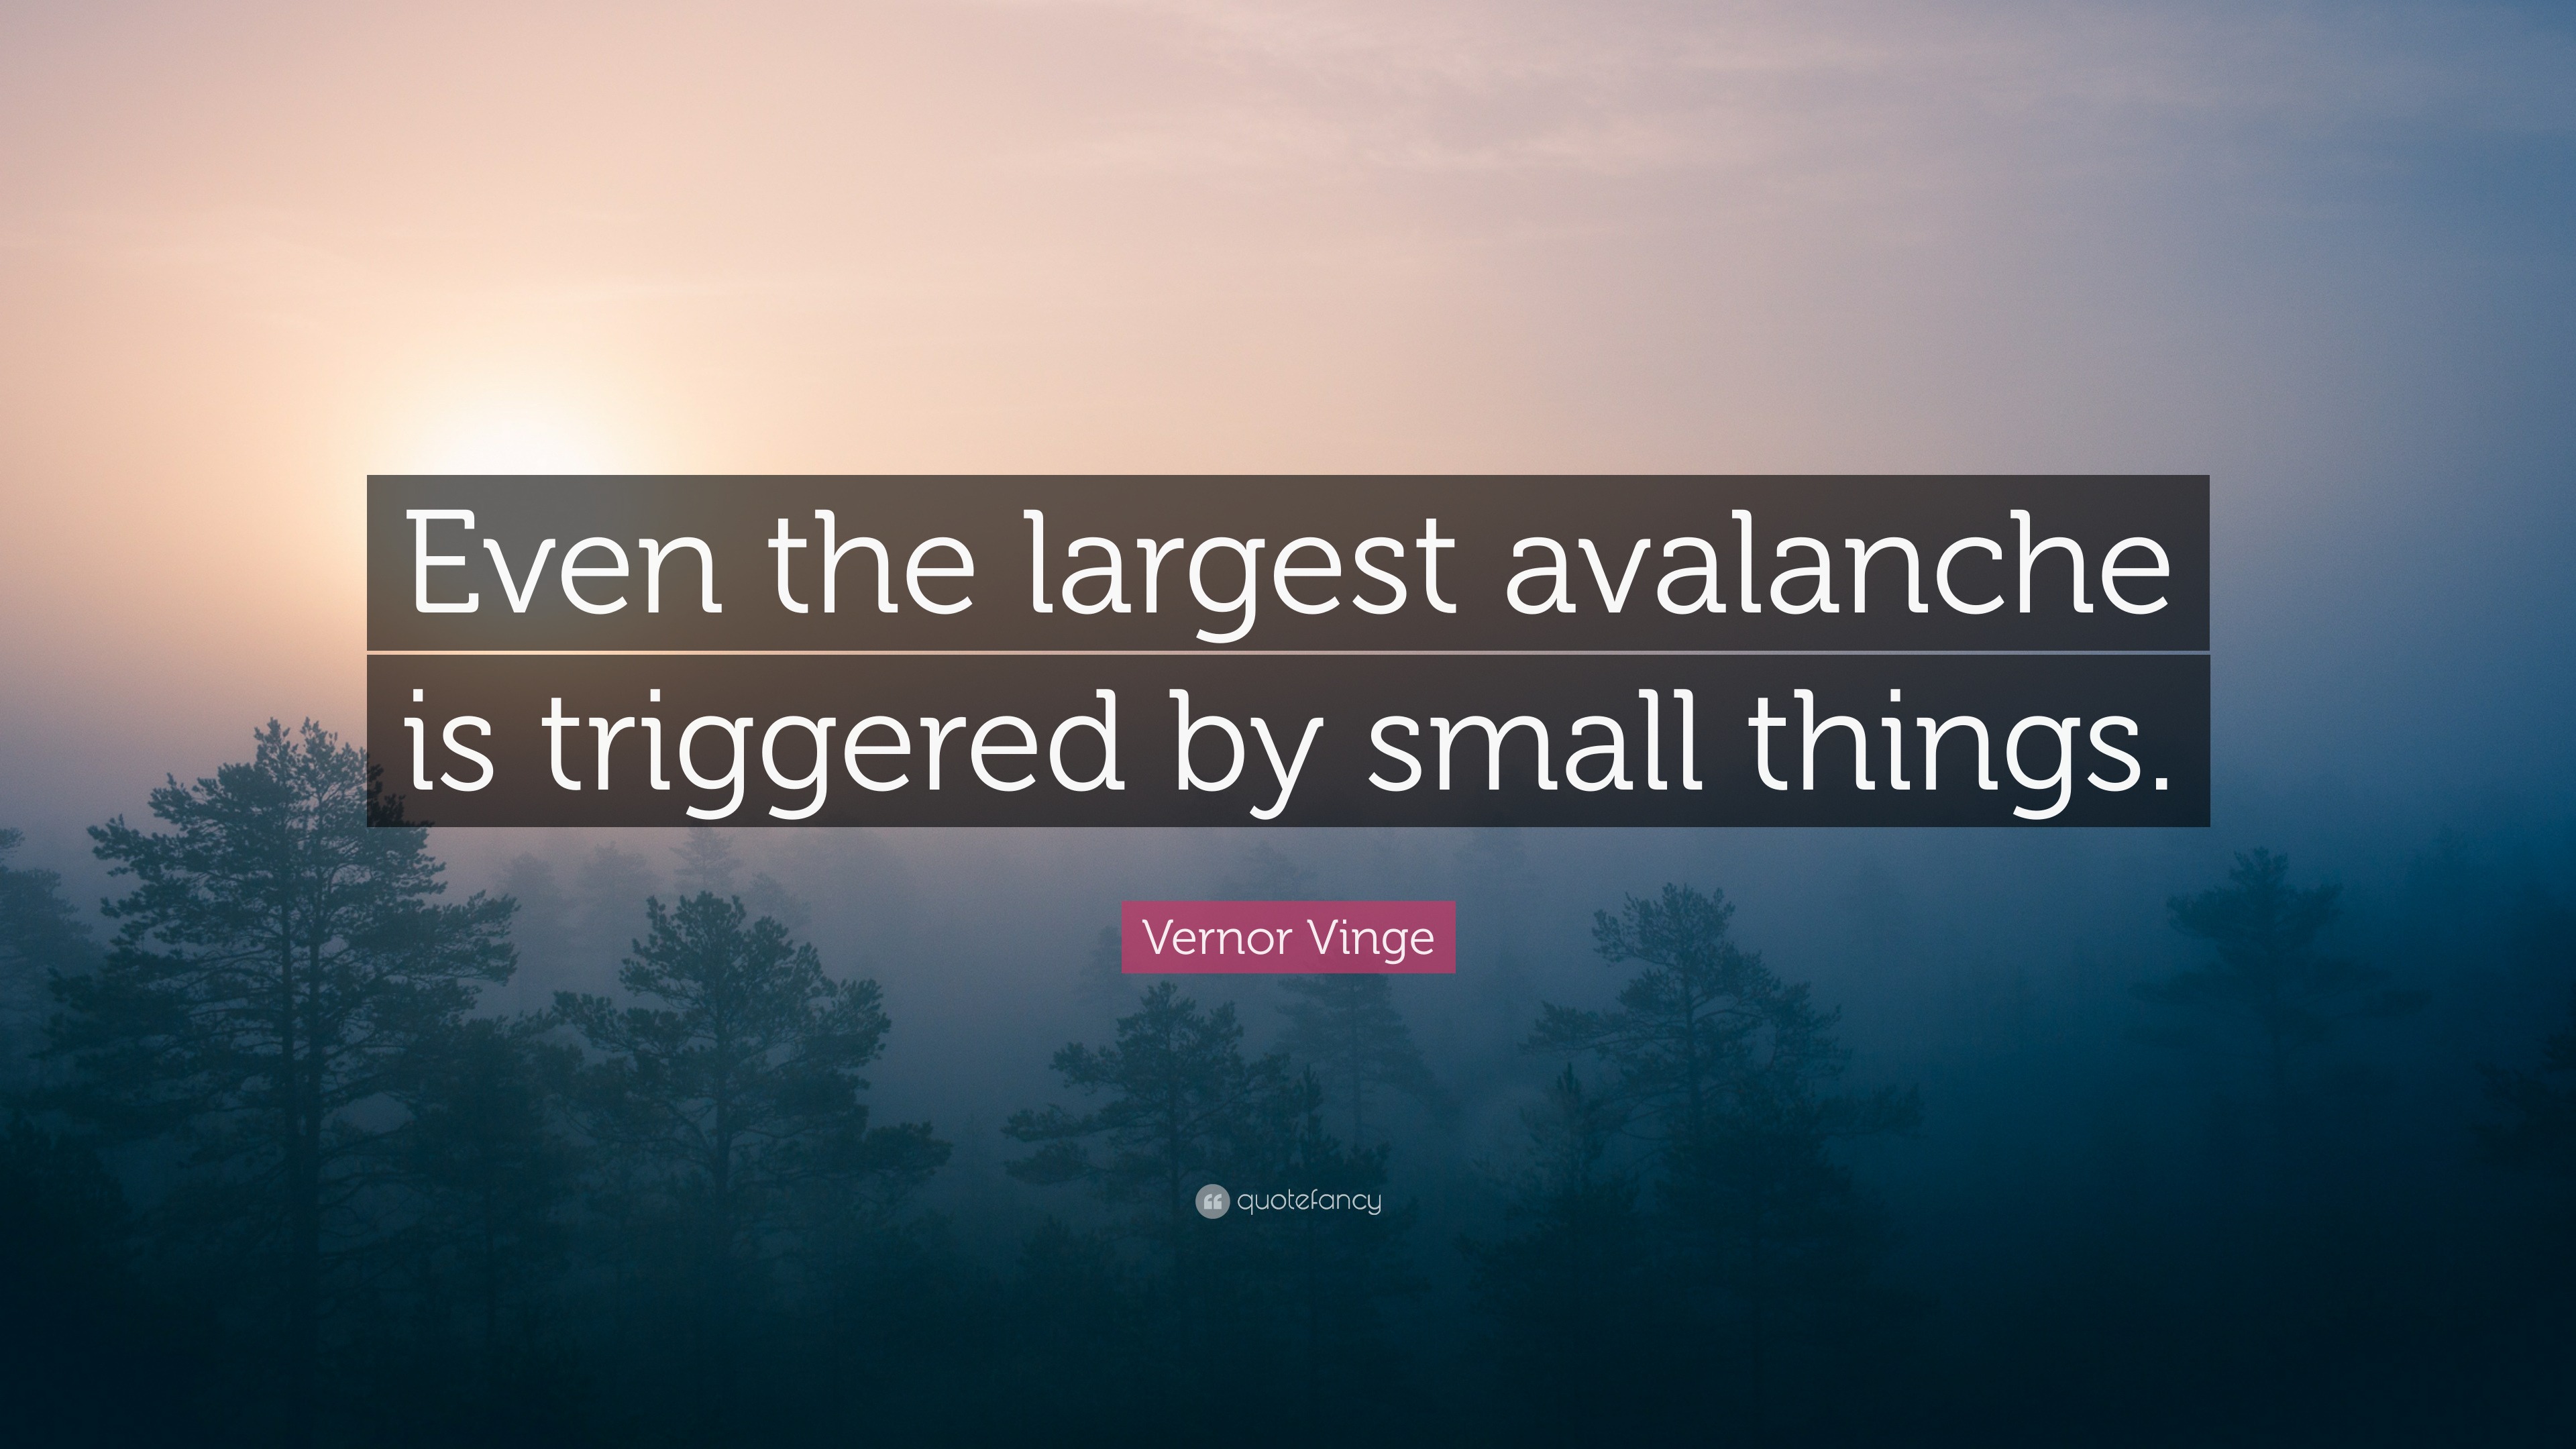 https://quotefancy.com/media/wallpaper/3840x2160/3025776-Vernor-Vinge-Quote-Even-the-largest-avalanche-is-triggered-by.jpg